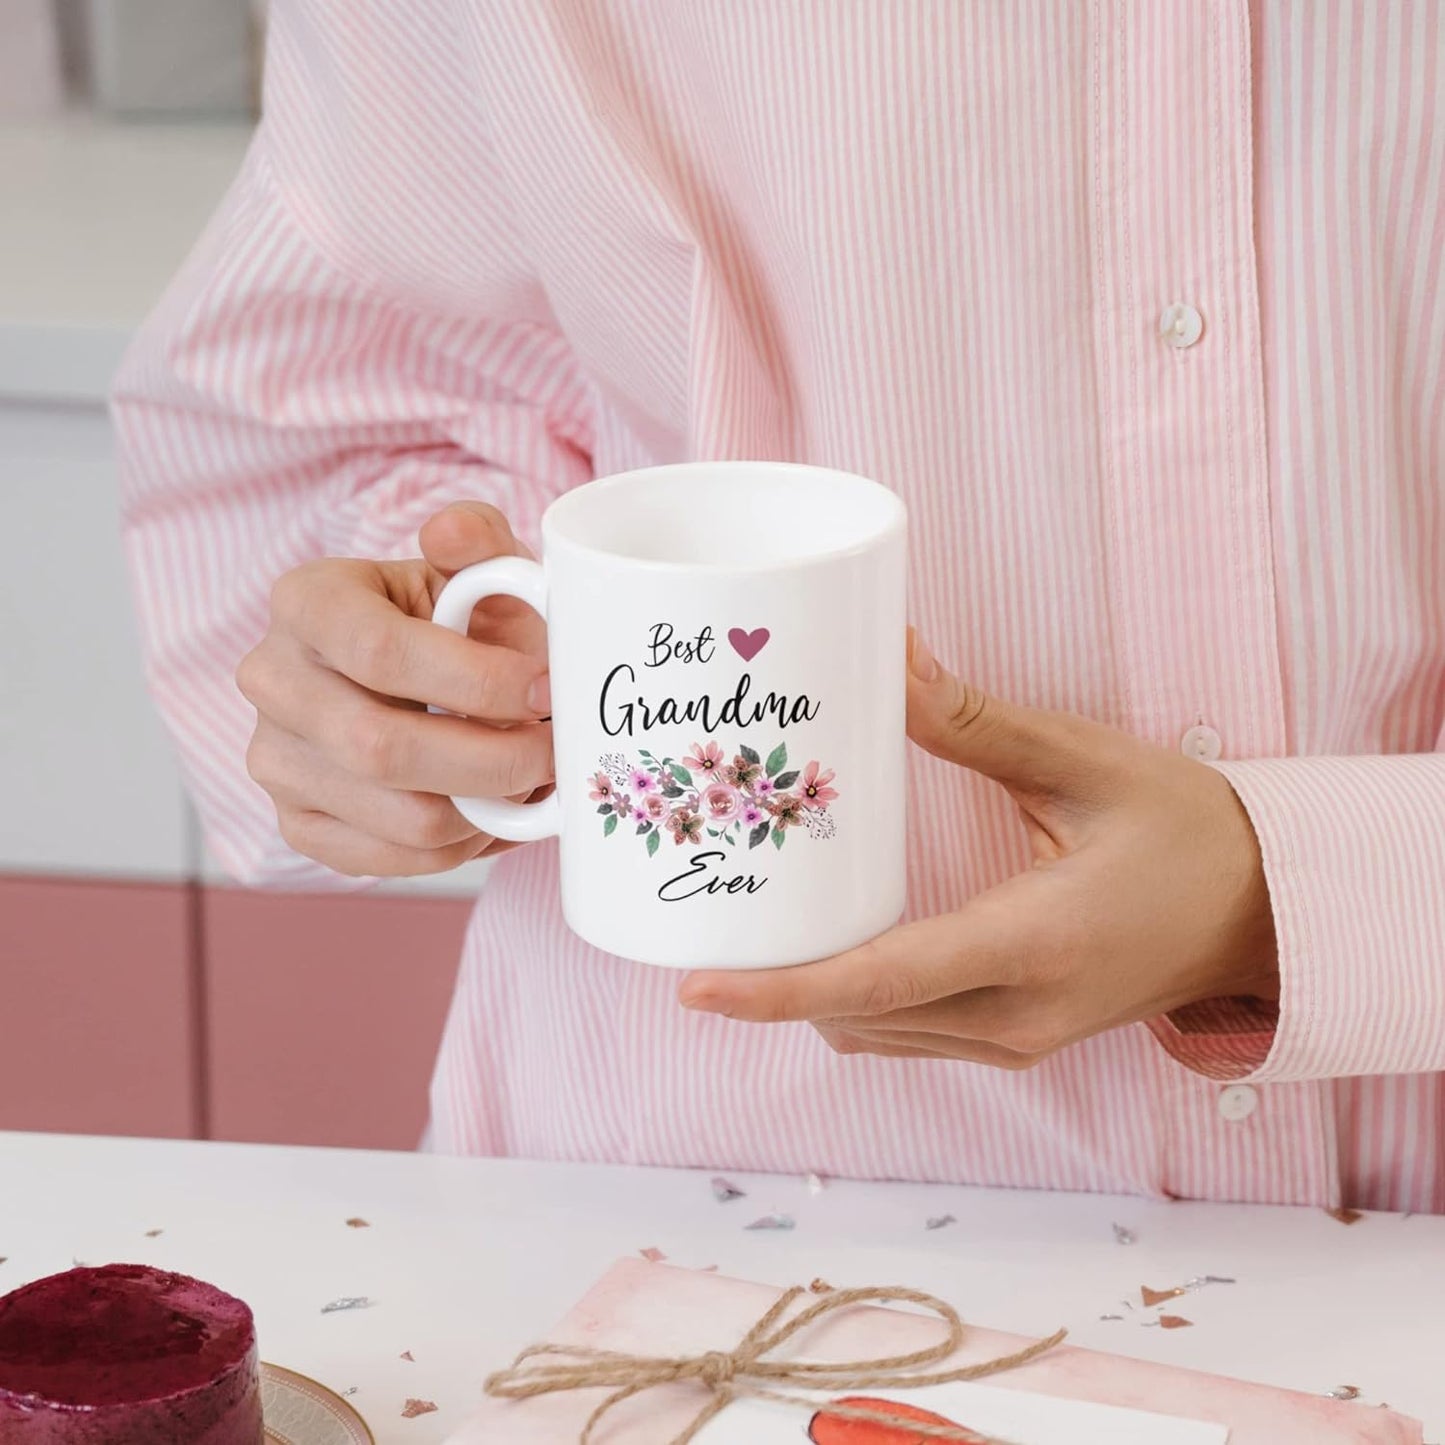 Best Grandma Ever Coffee Mug, Best Grandma Gifts, Nana Cup, Gifts For Mimi, Nana Gifts From Grandkids, Grammy Birthday Gifts, Worlds Best Grandma Cup, Grandma Presents For Christmas, Mimi Mothers Day